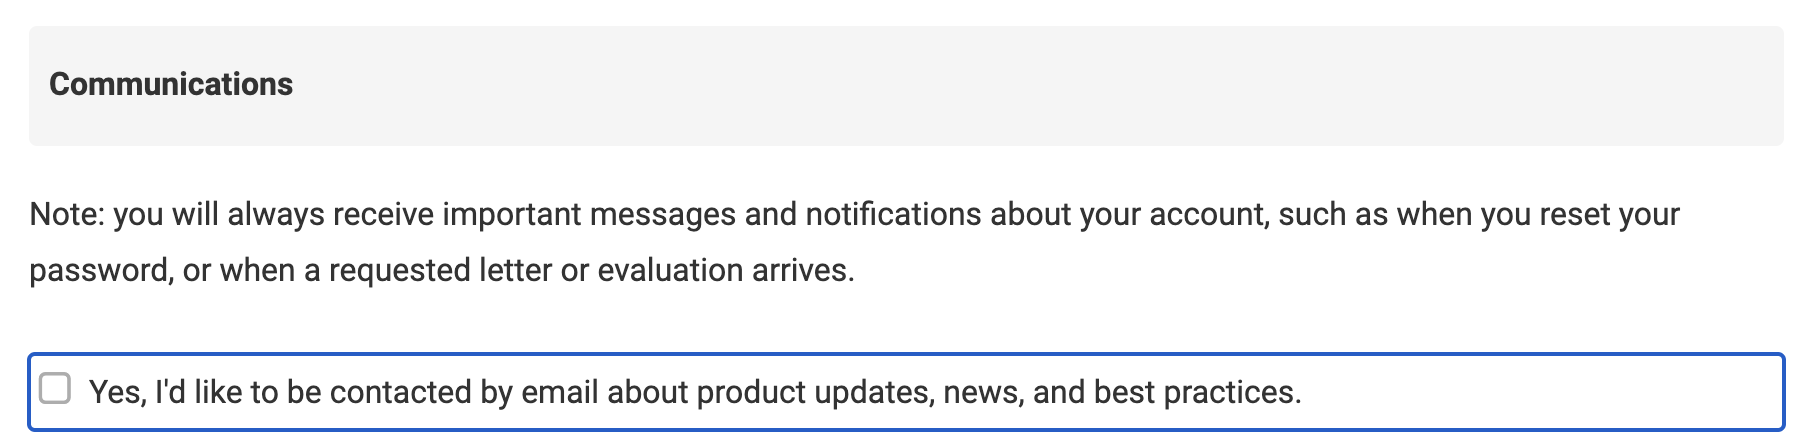 Communications section with checkbox below adjacent to the phrase Yes, I'd like to be contacted by email about product updates, news, and best practices